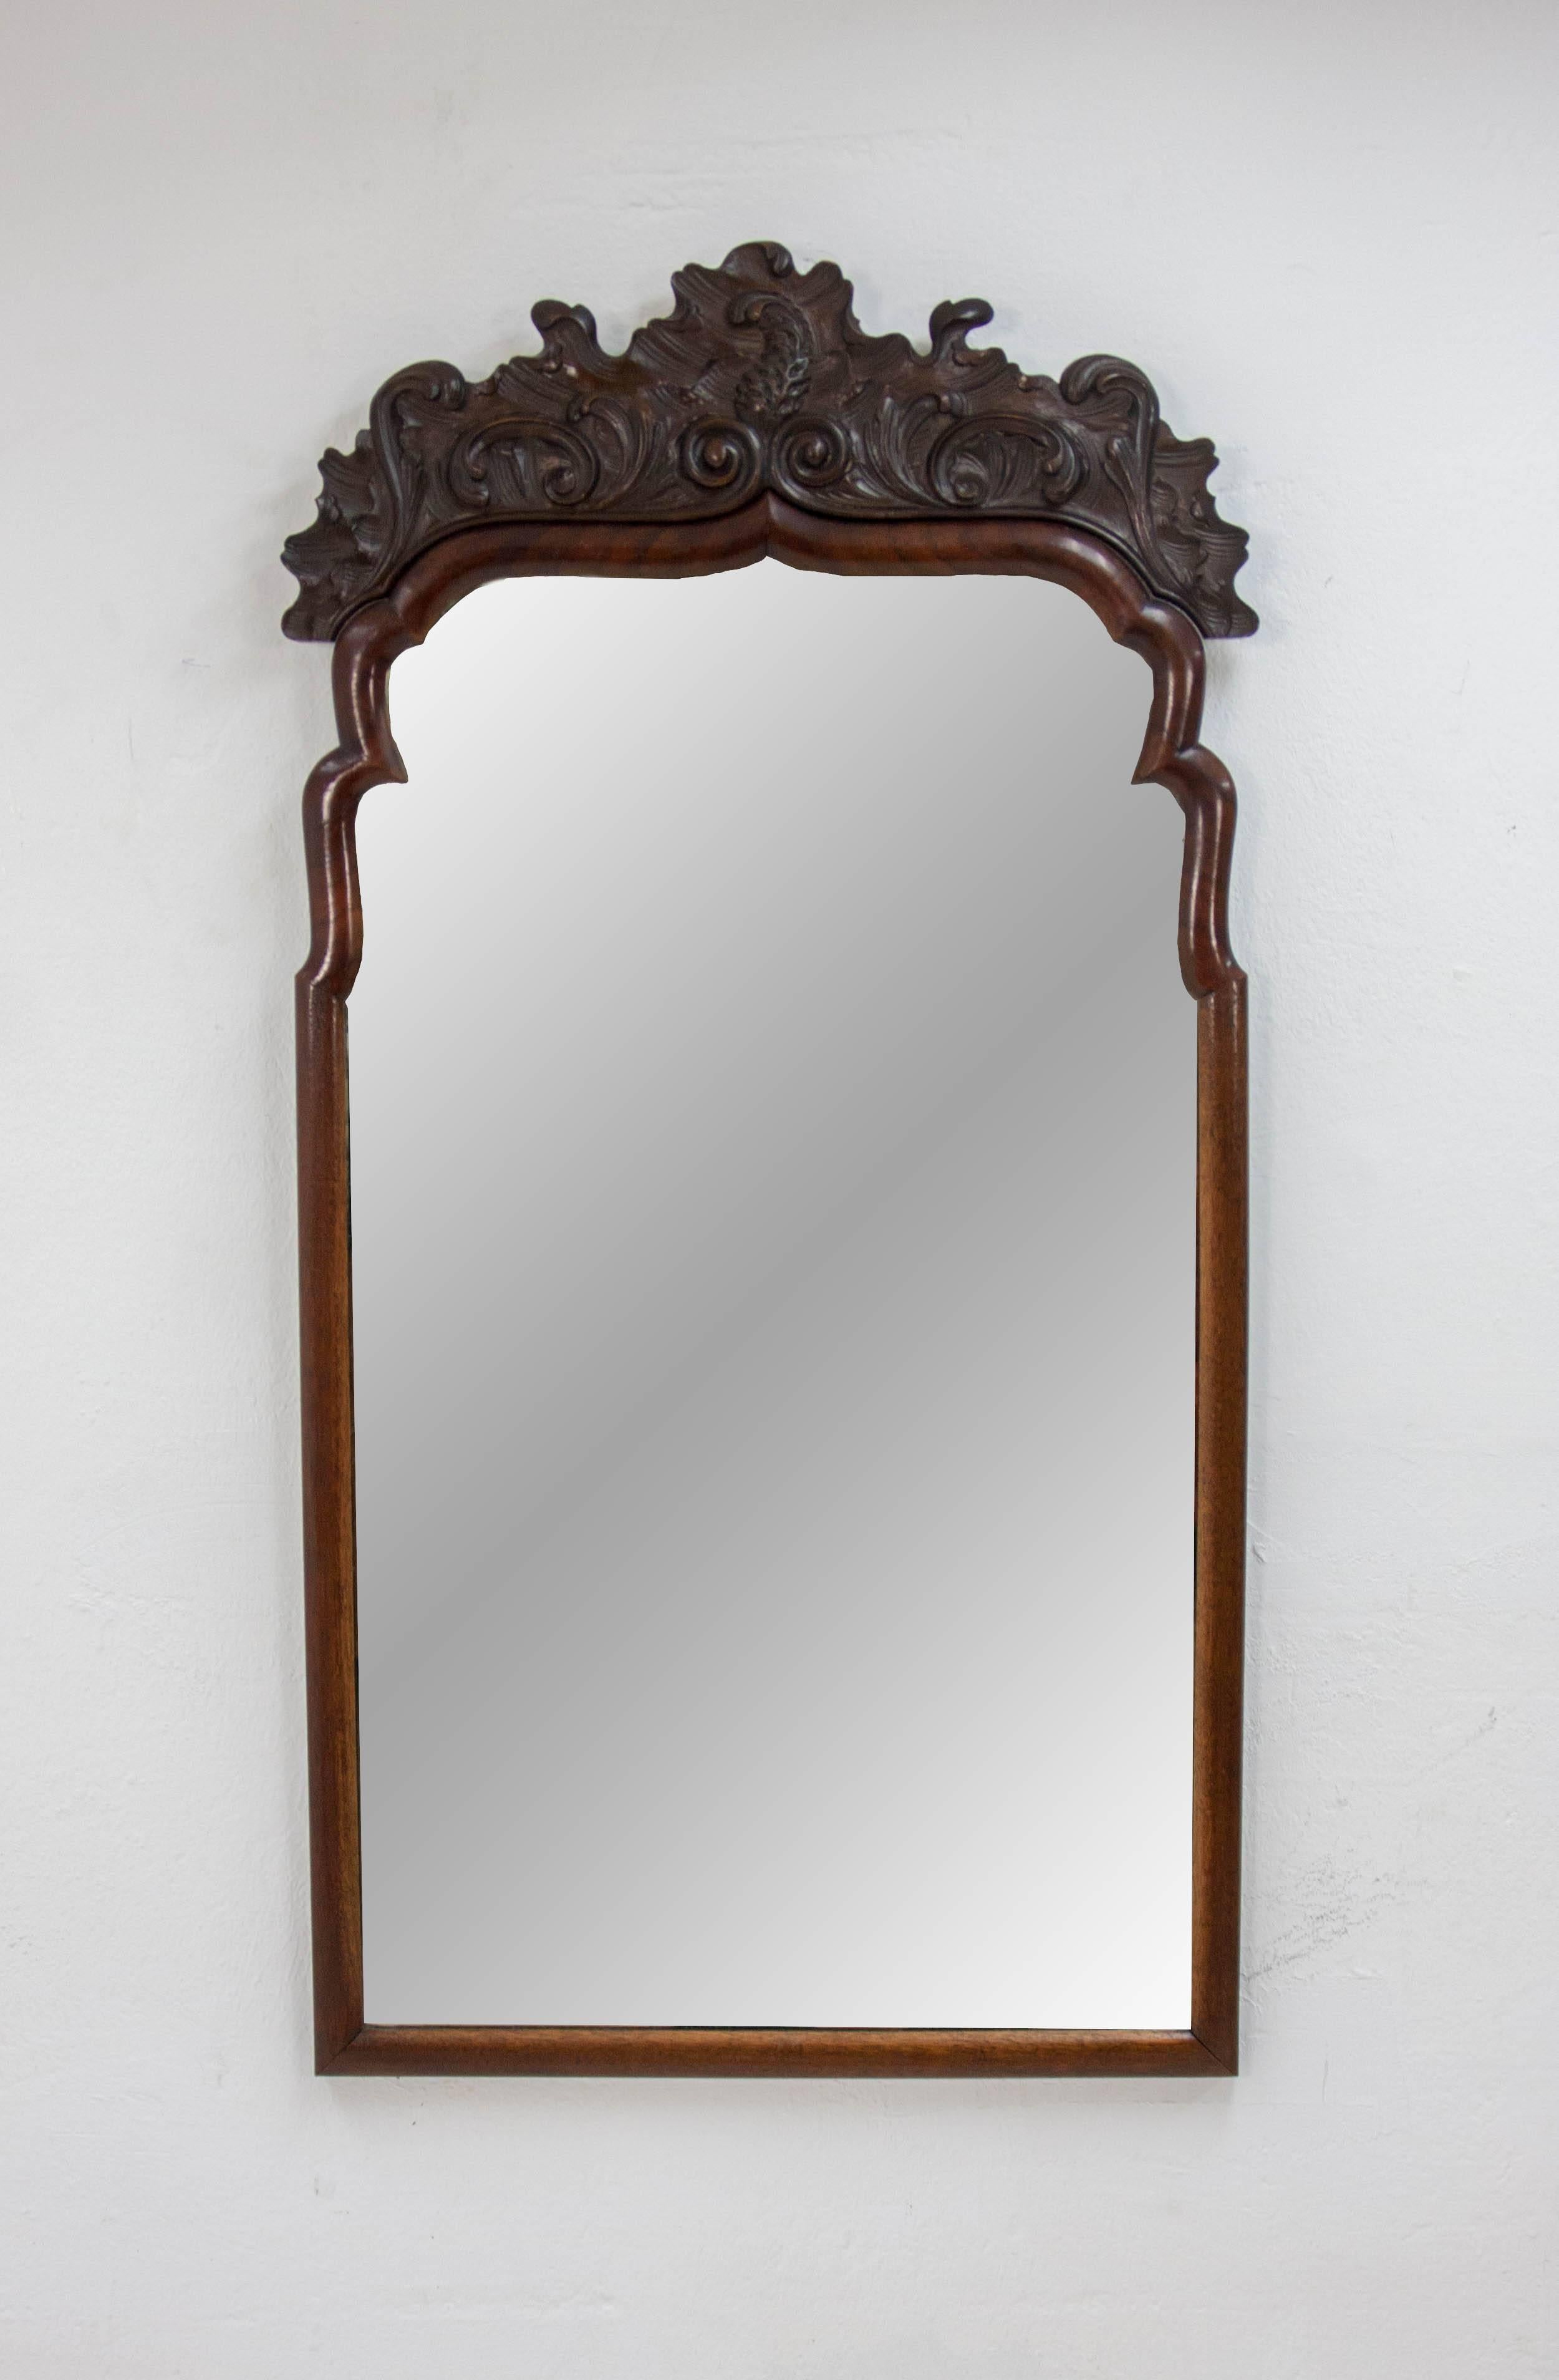 Mahogany Biedermeier mirror. 1840-1860. Comes with a detachable decorative piece produced later on (1930s) and most likely Indonesian in origin.